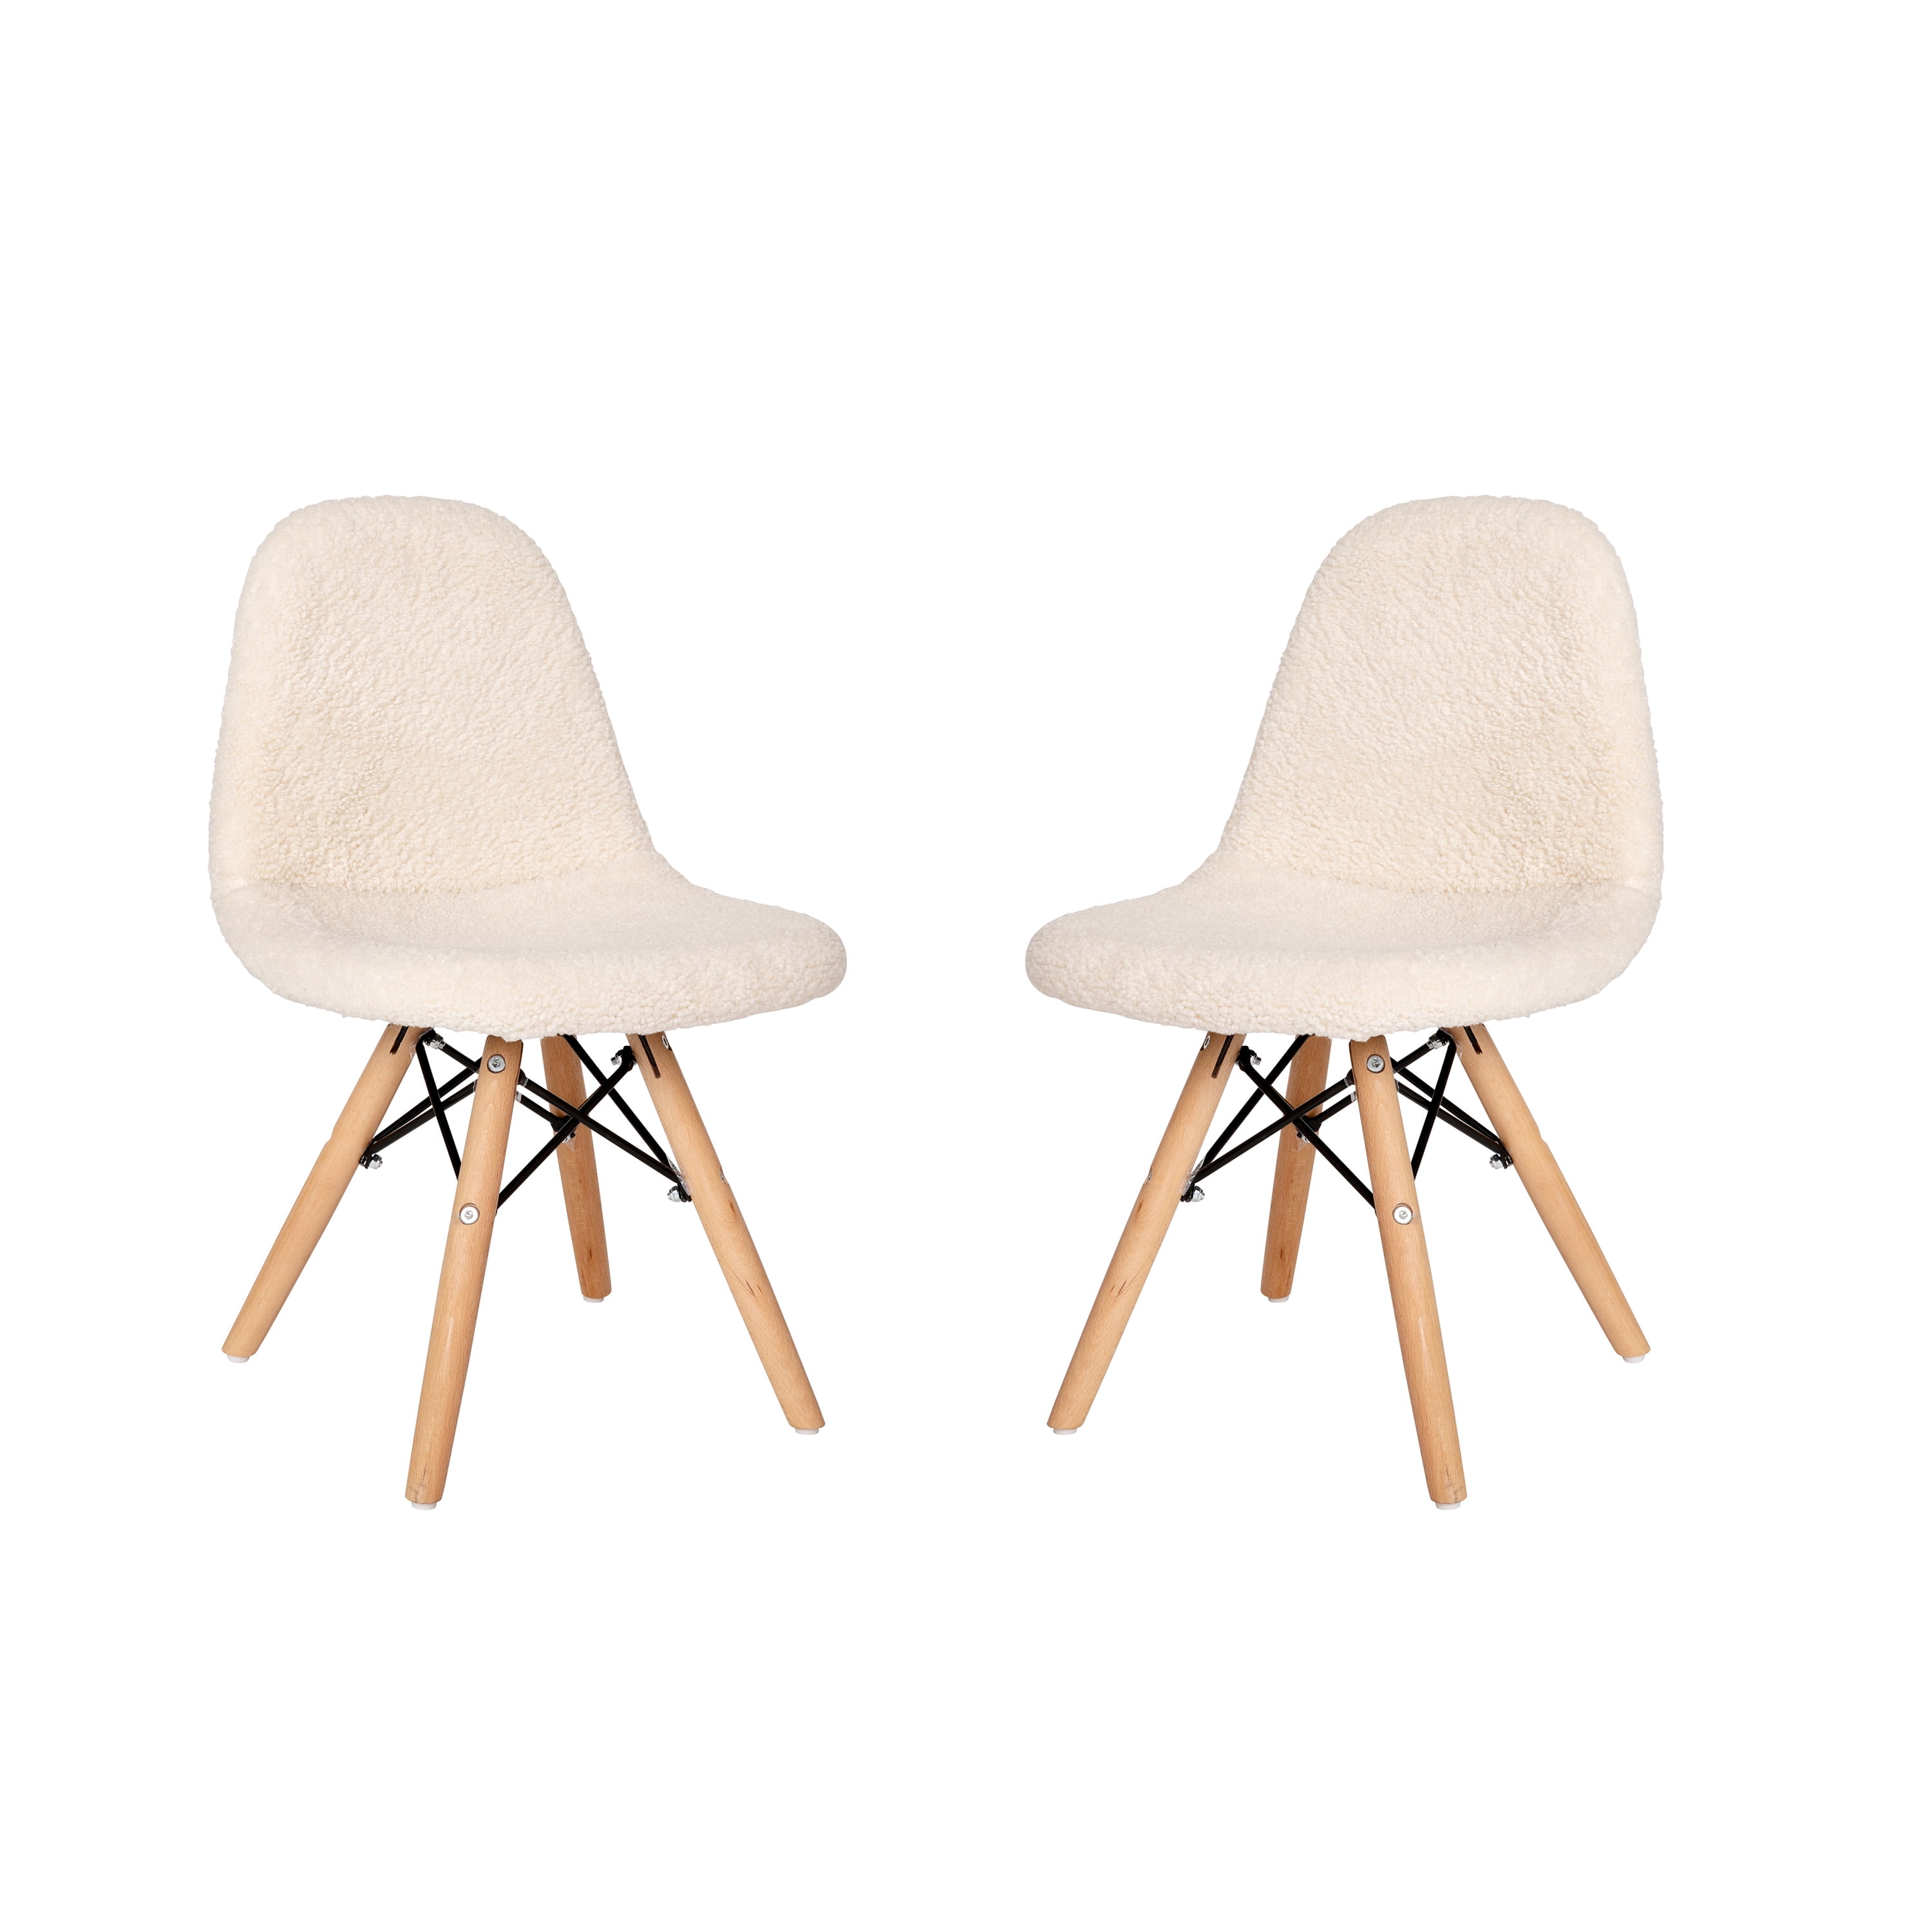 Flash Furniture Zula Collection Kids Furry Chairs, Off-White, Set of 2 